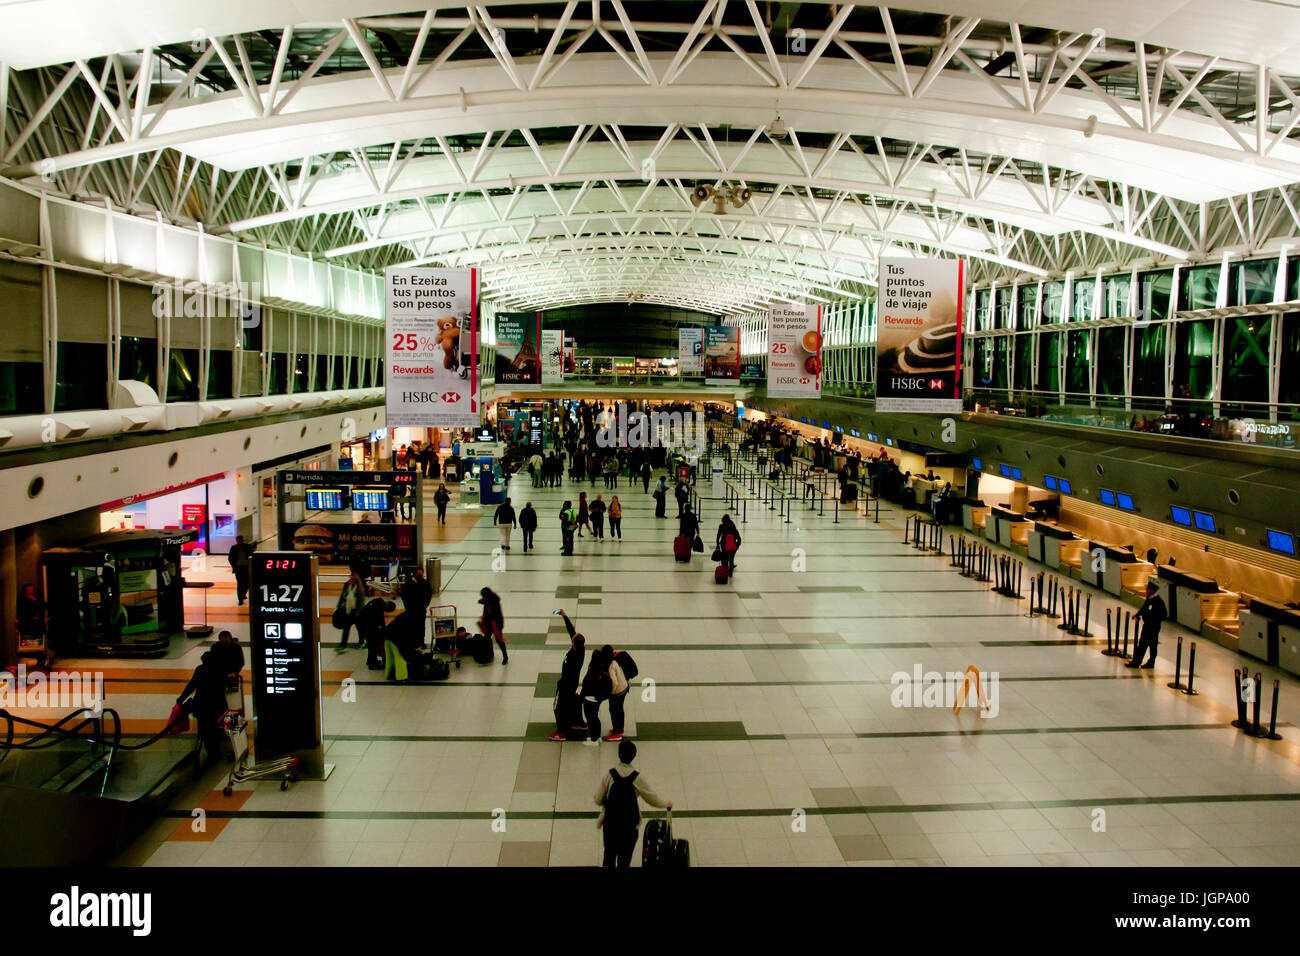 BUENOS AIRES, ARGENTINA - May 19, 2017: Inside Ezeiza international airport in the capital city Stock Photo